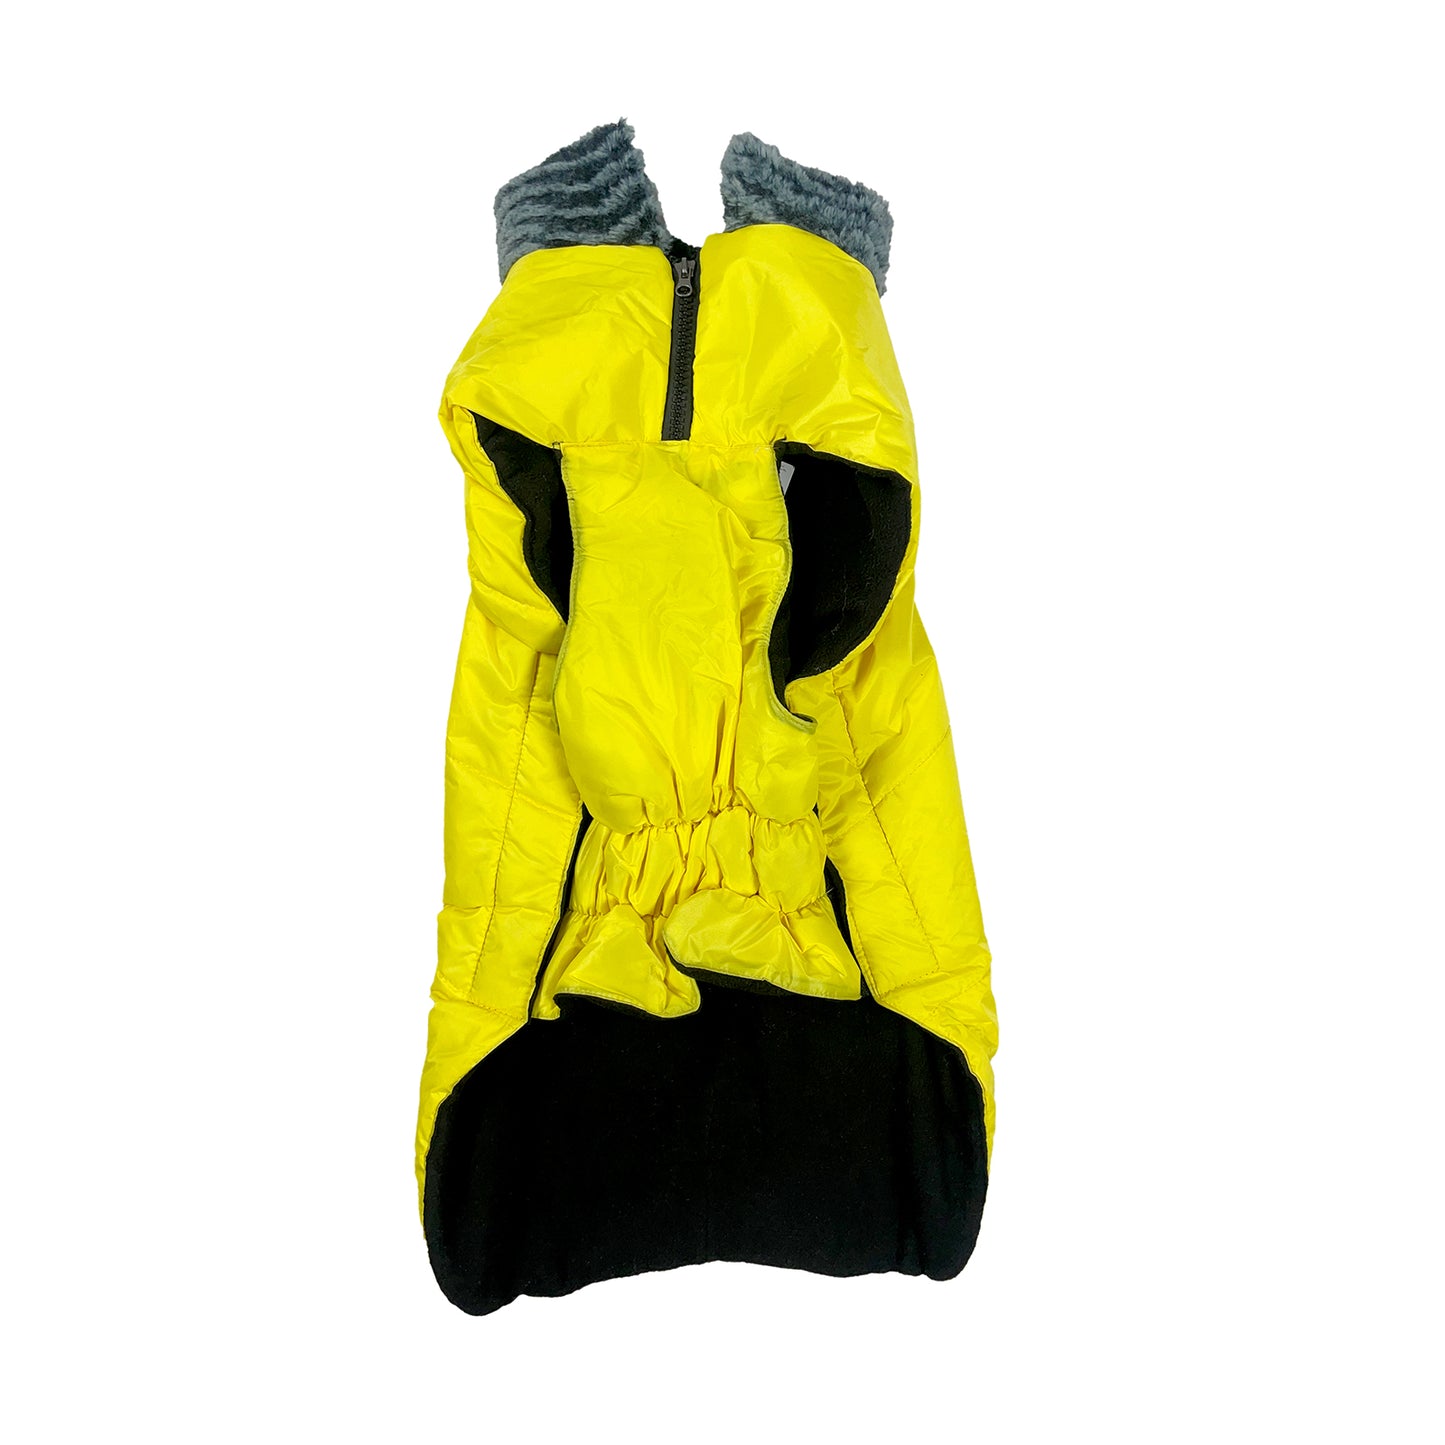 Tails Nation Solid Fur Jacket Yellow | Warm and Stylish with Harness Opening